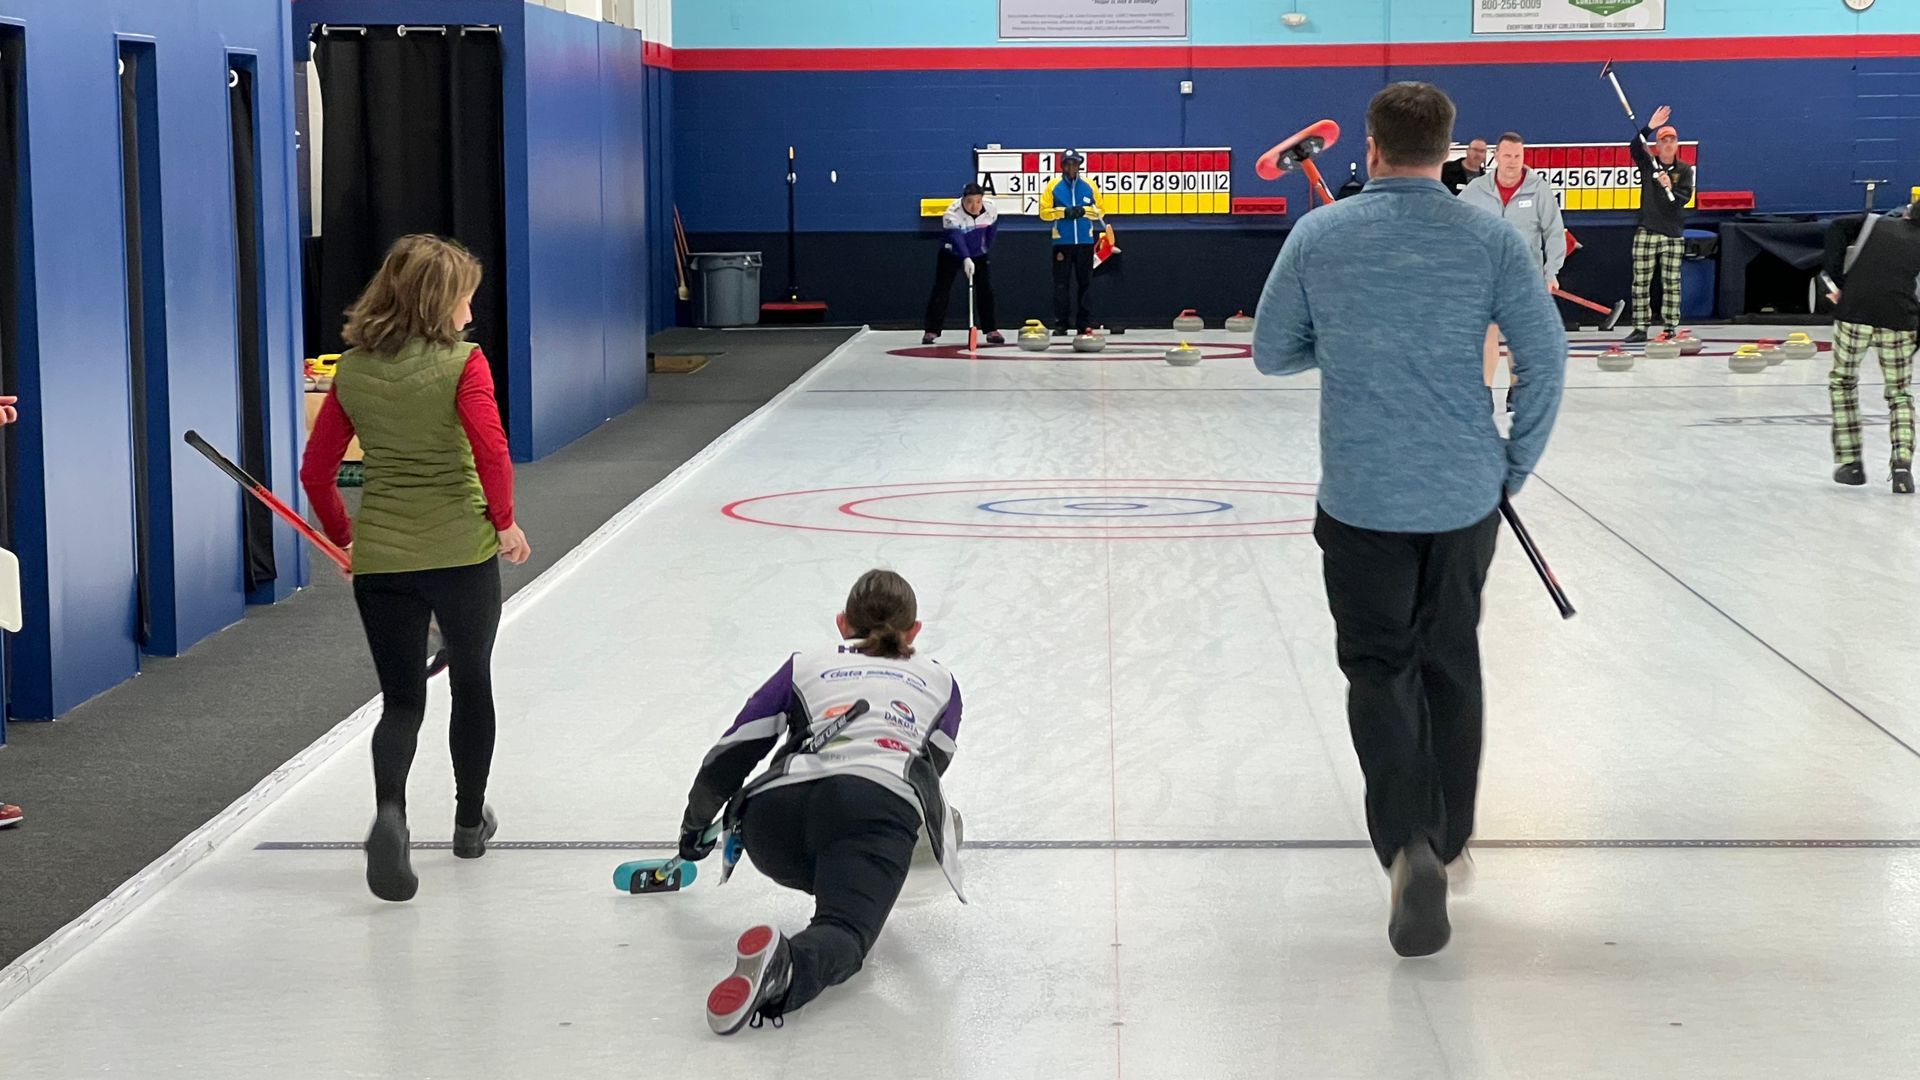 A curler throws a stone down a curling rink towards a target located away from the camera, with two sweepers running on either side of her.